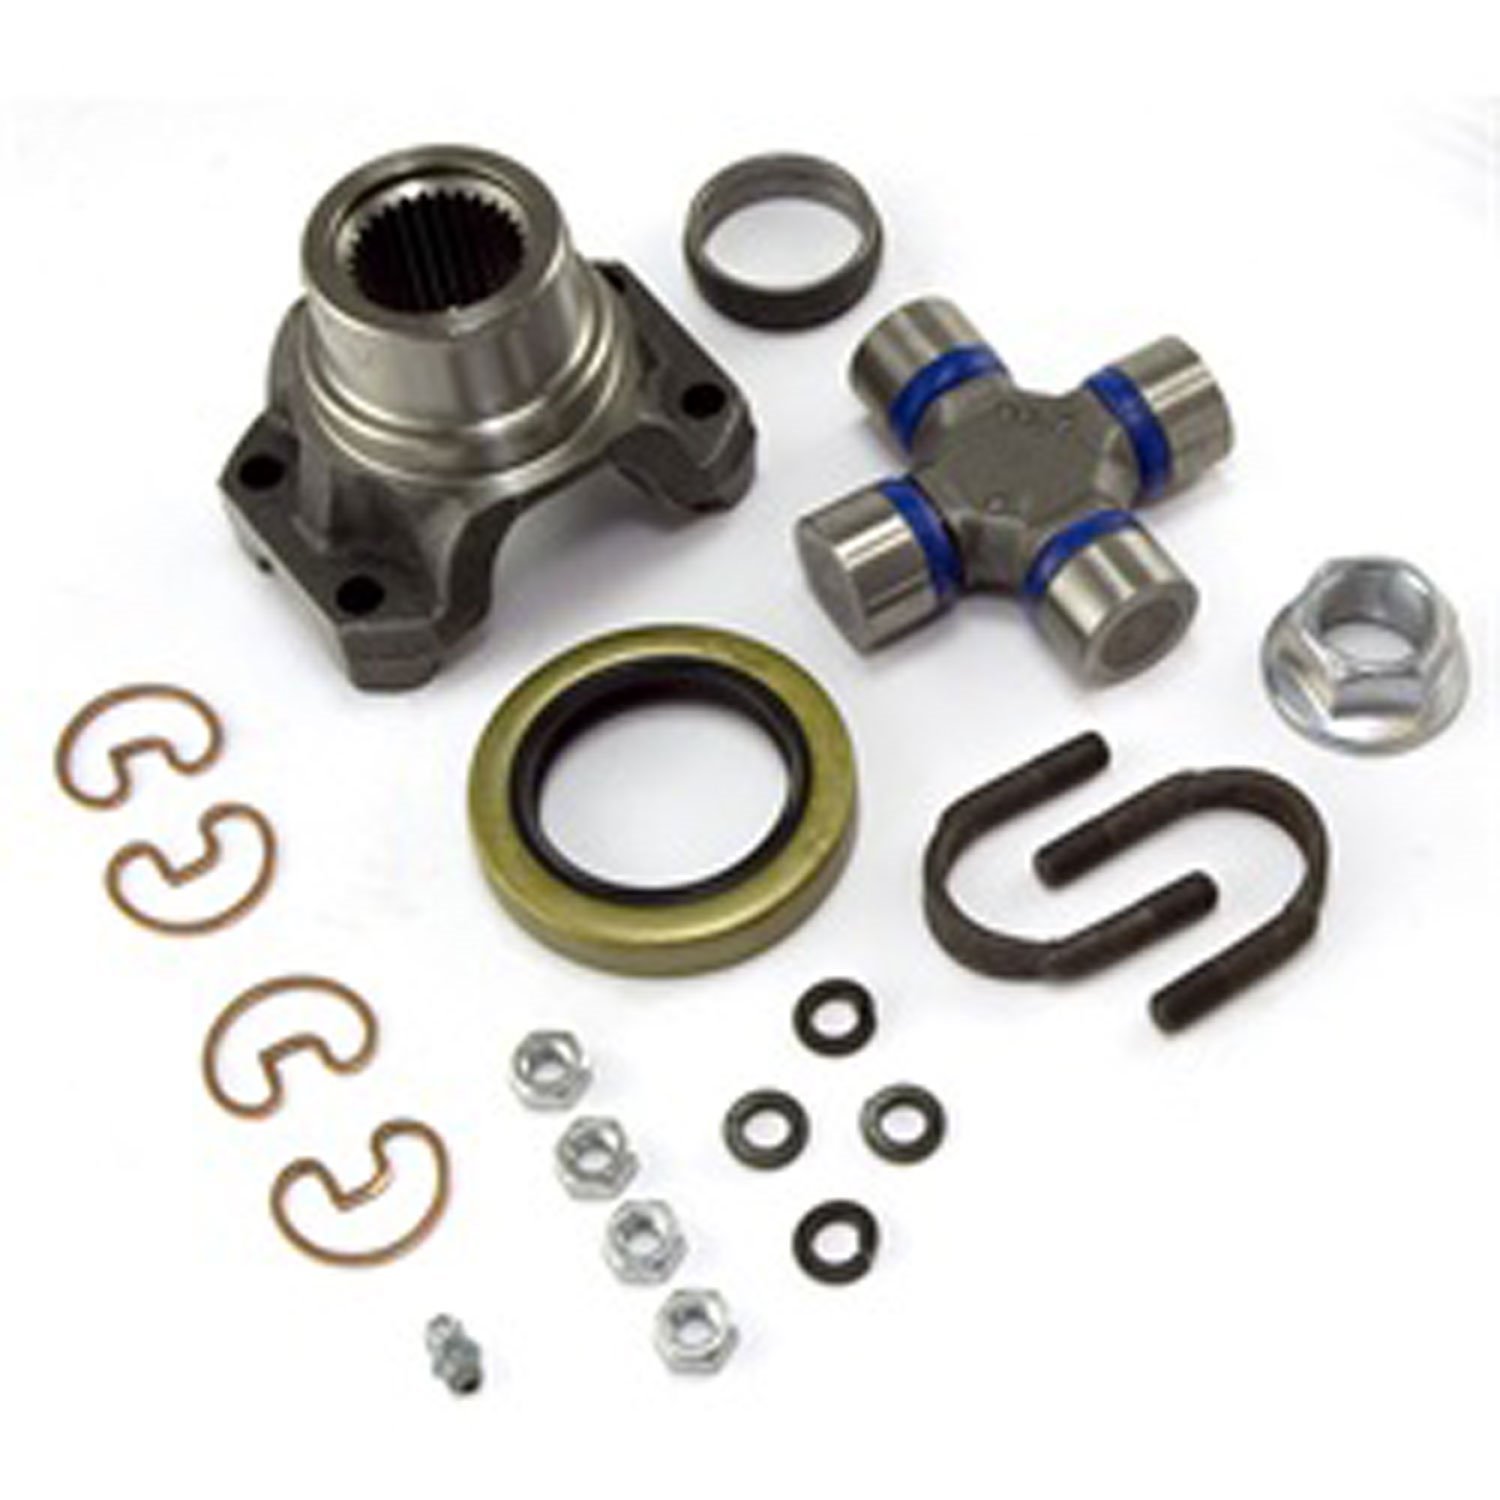 This yoke conversion kit from Alloy USA fits 76-83 Jeep CJ5 76-86 CJ7 and 81-86 CJ8 with an AMC 20 rear axle.